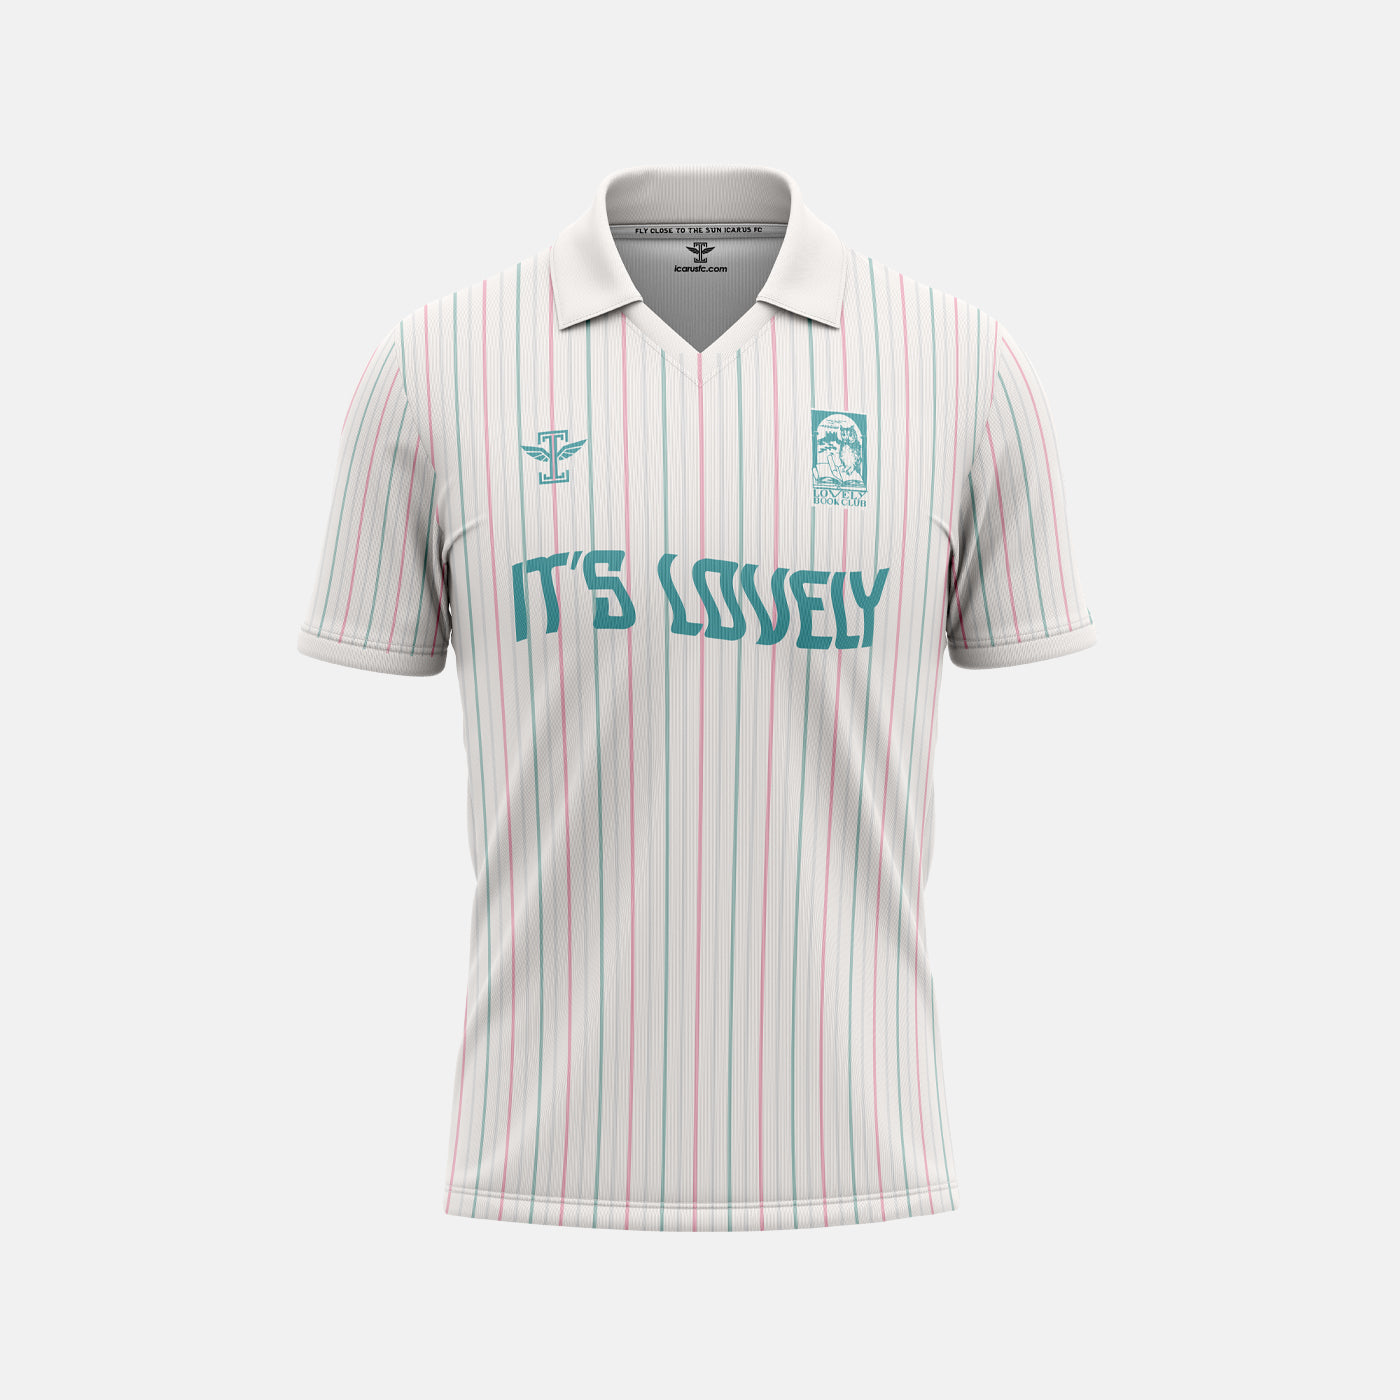 Lovely Book Club Outfield Jersey